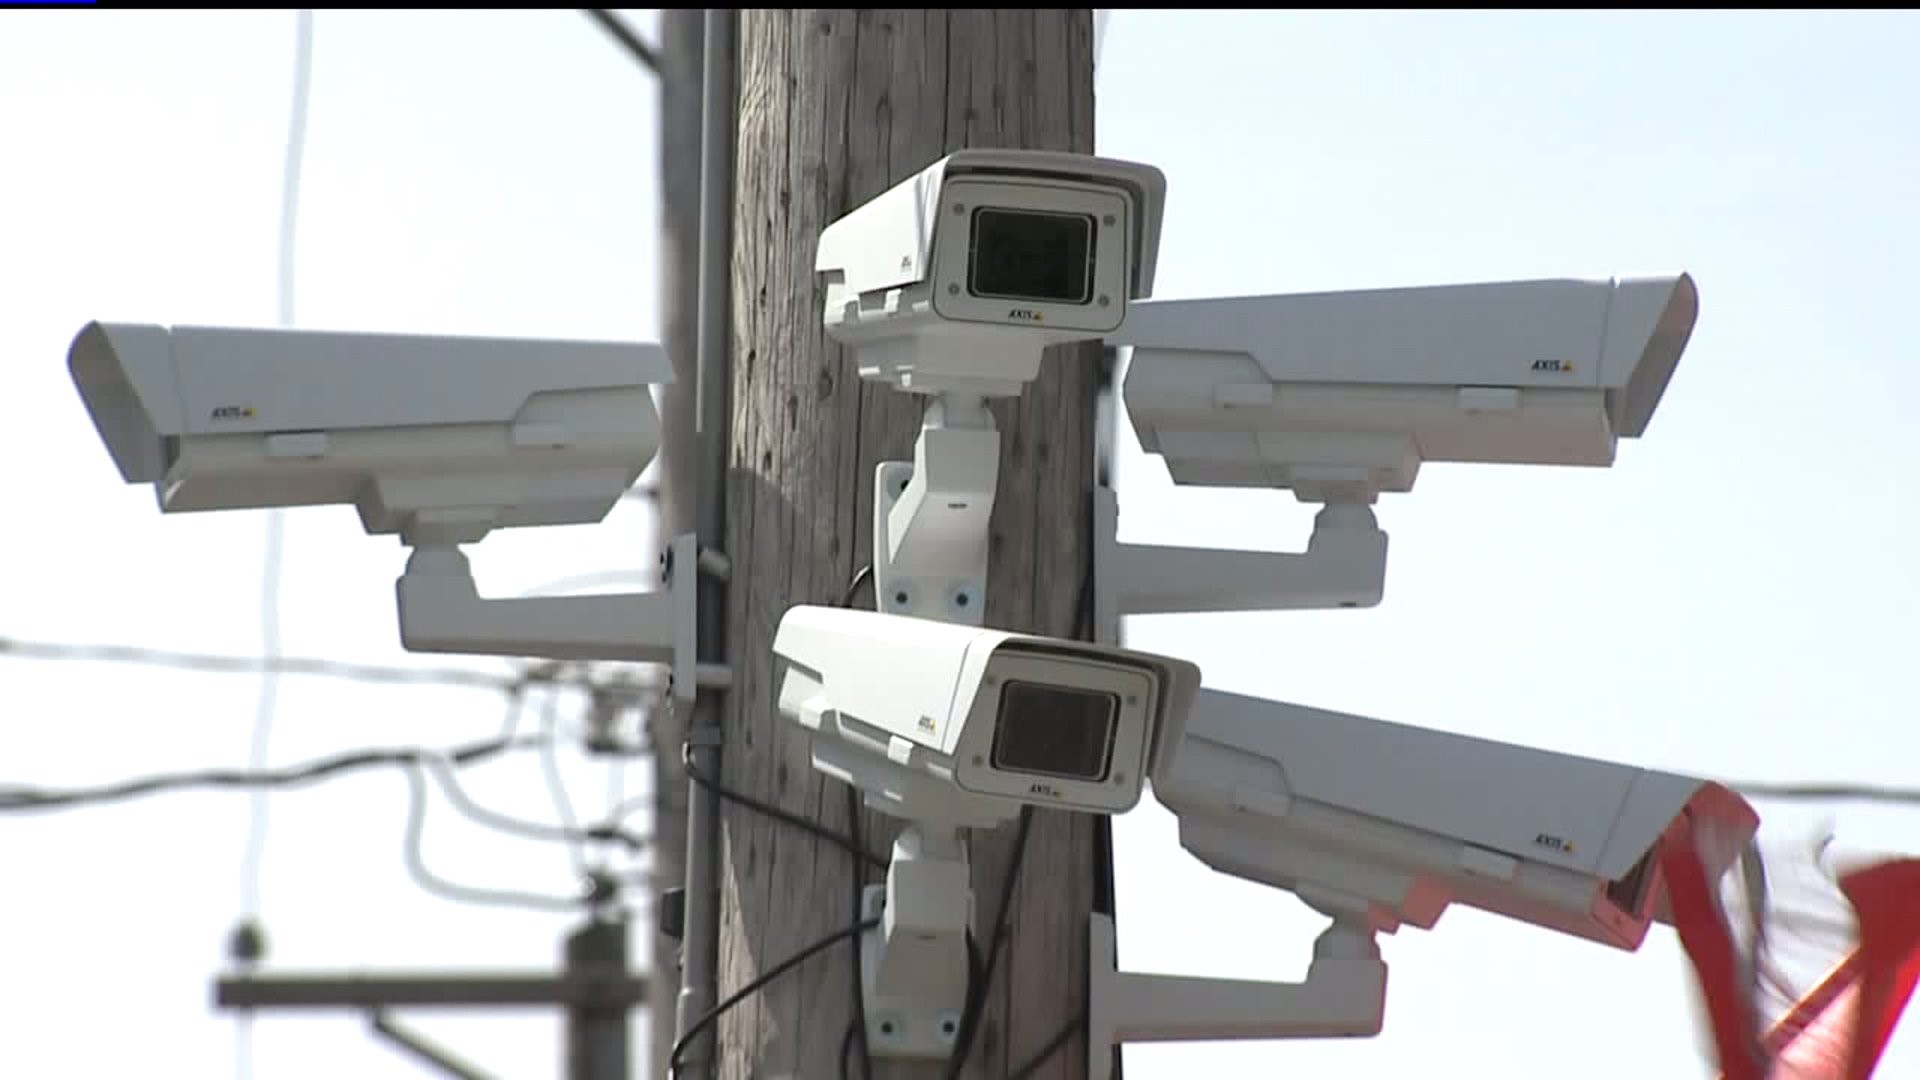 Cameras Installed years ago lead to residents feeling safe